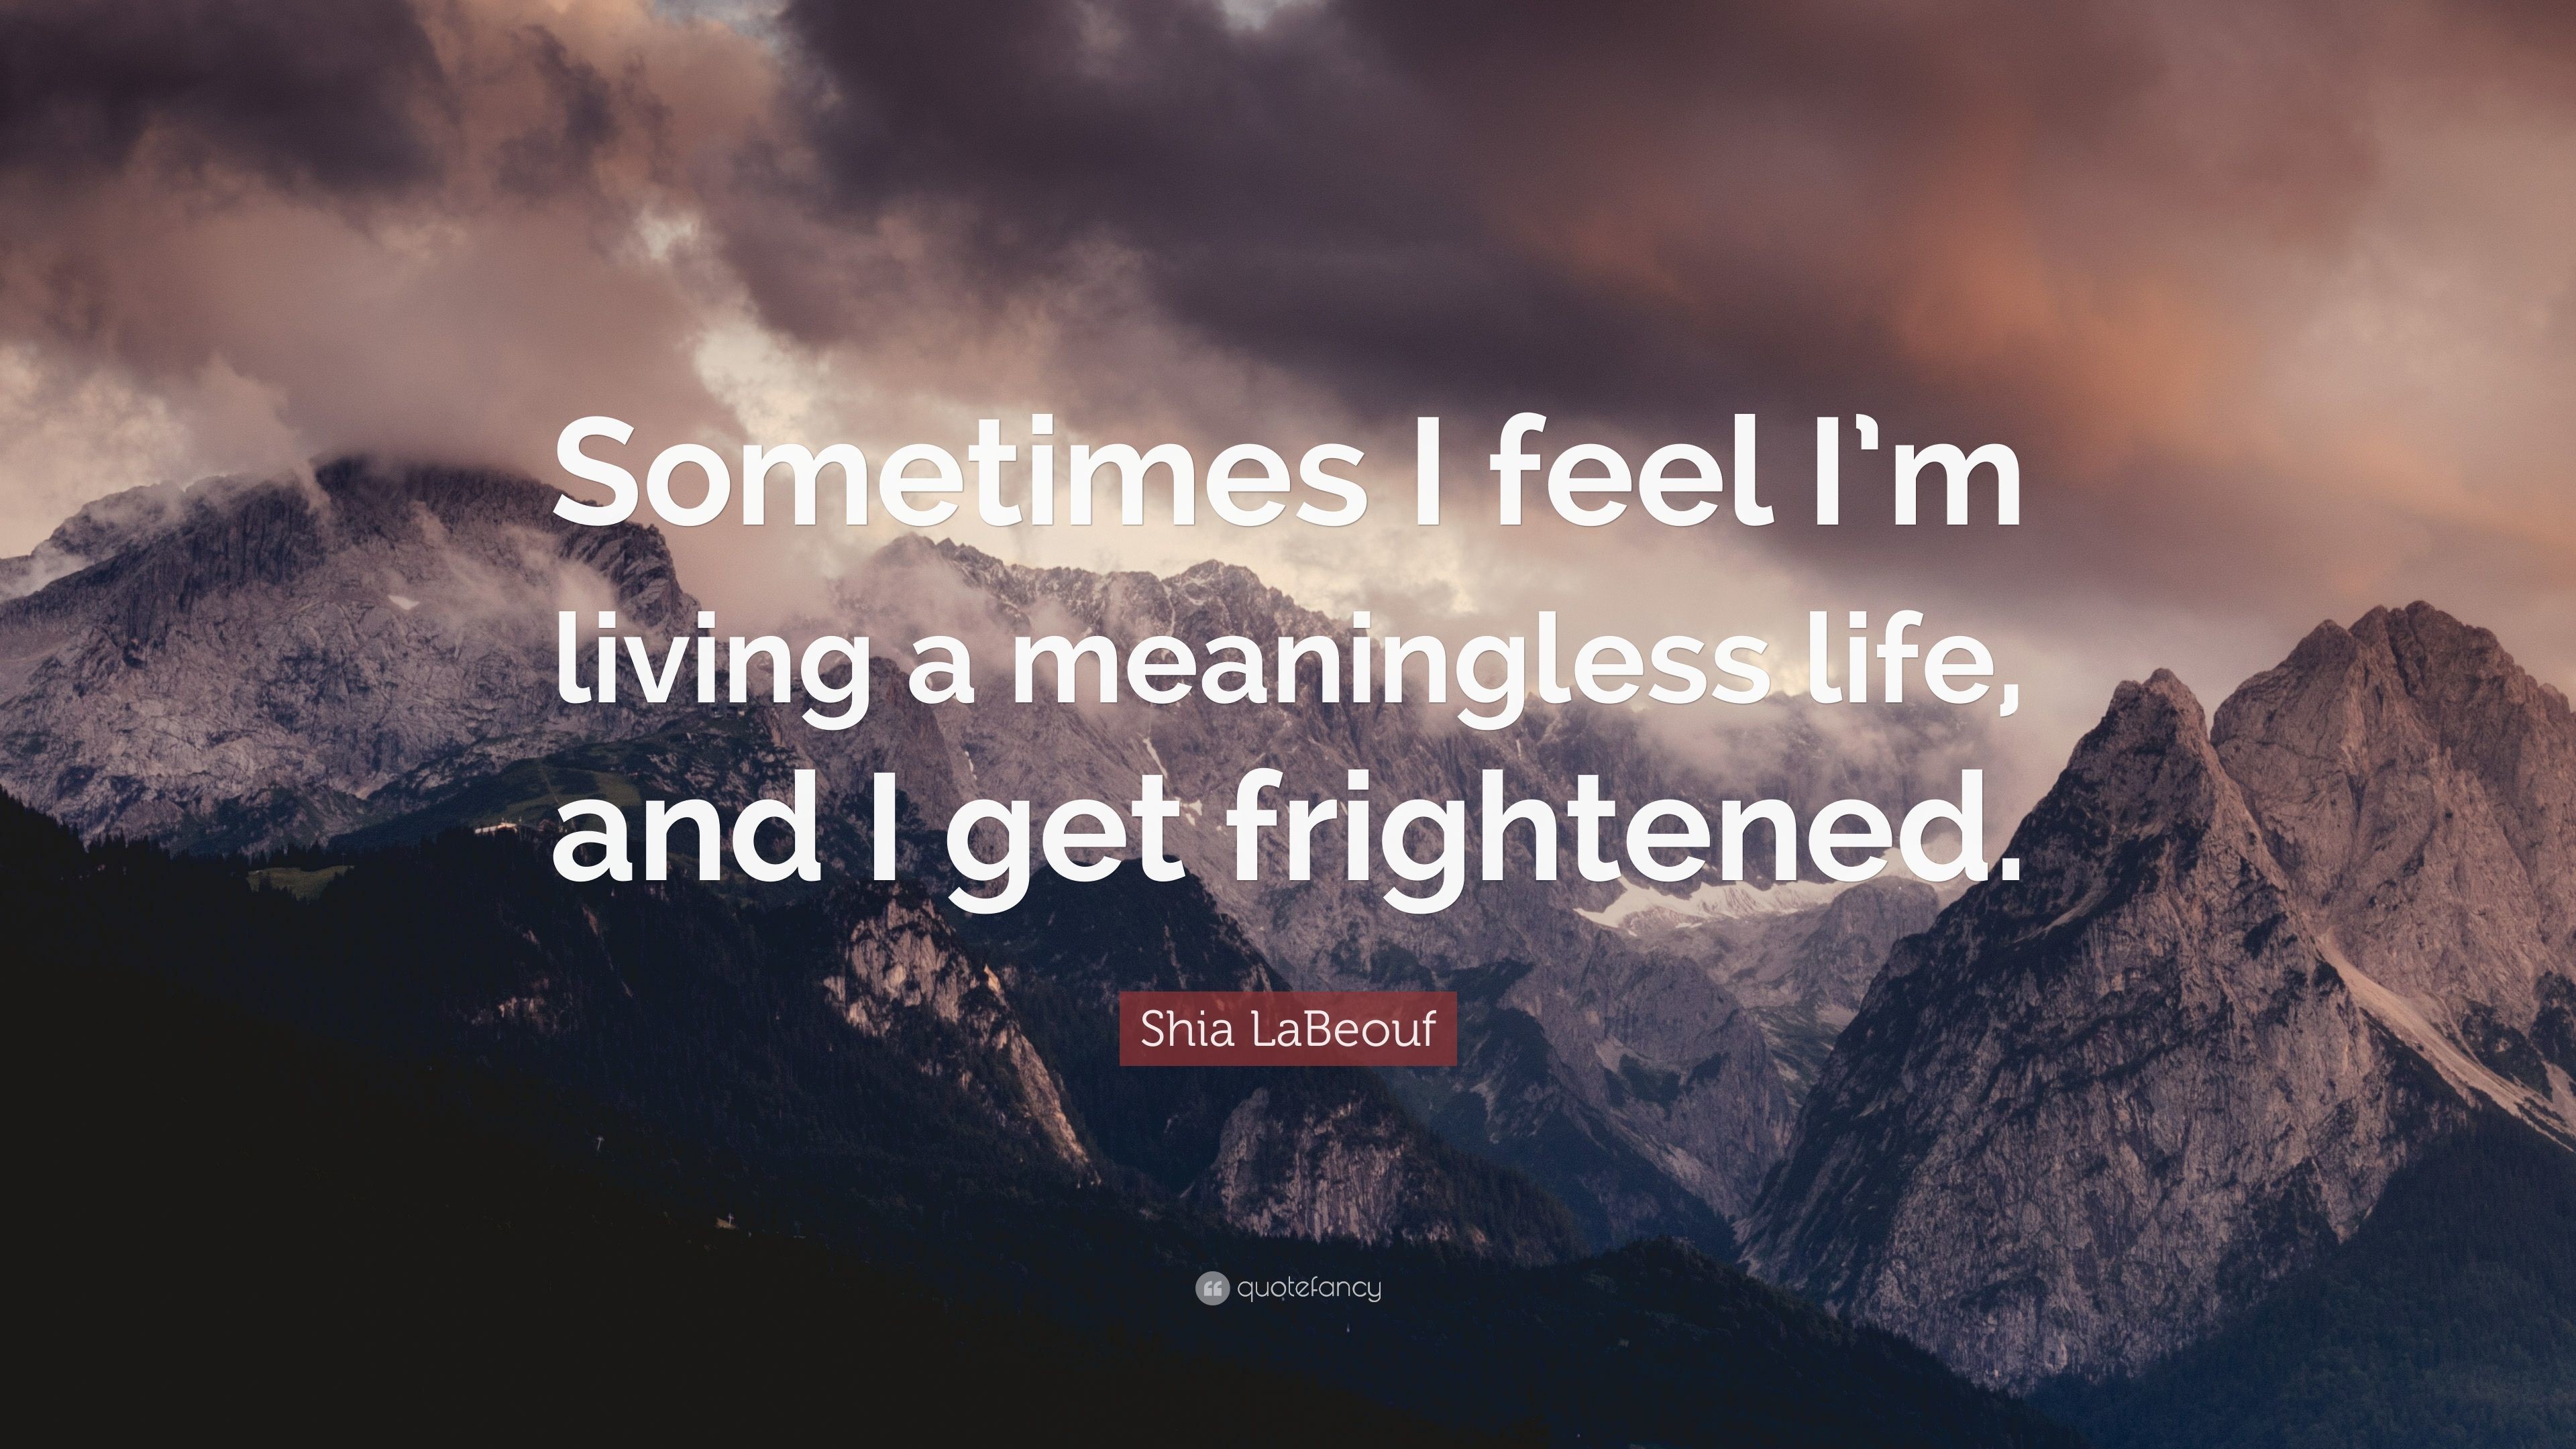 Shia LaBeouf Quote: “Sometimes I feel I'm living a meaningless life,